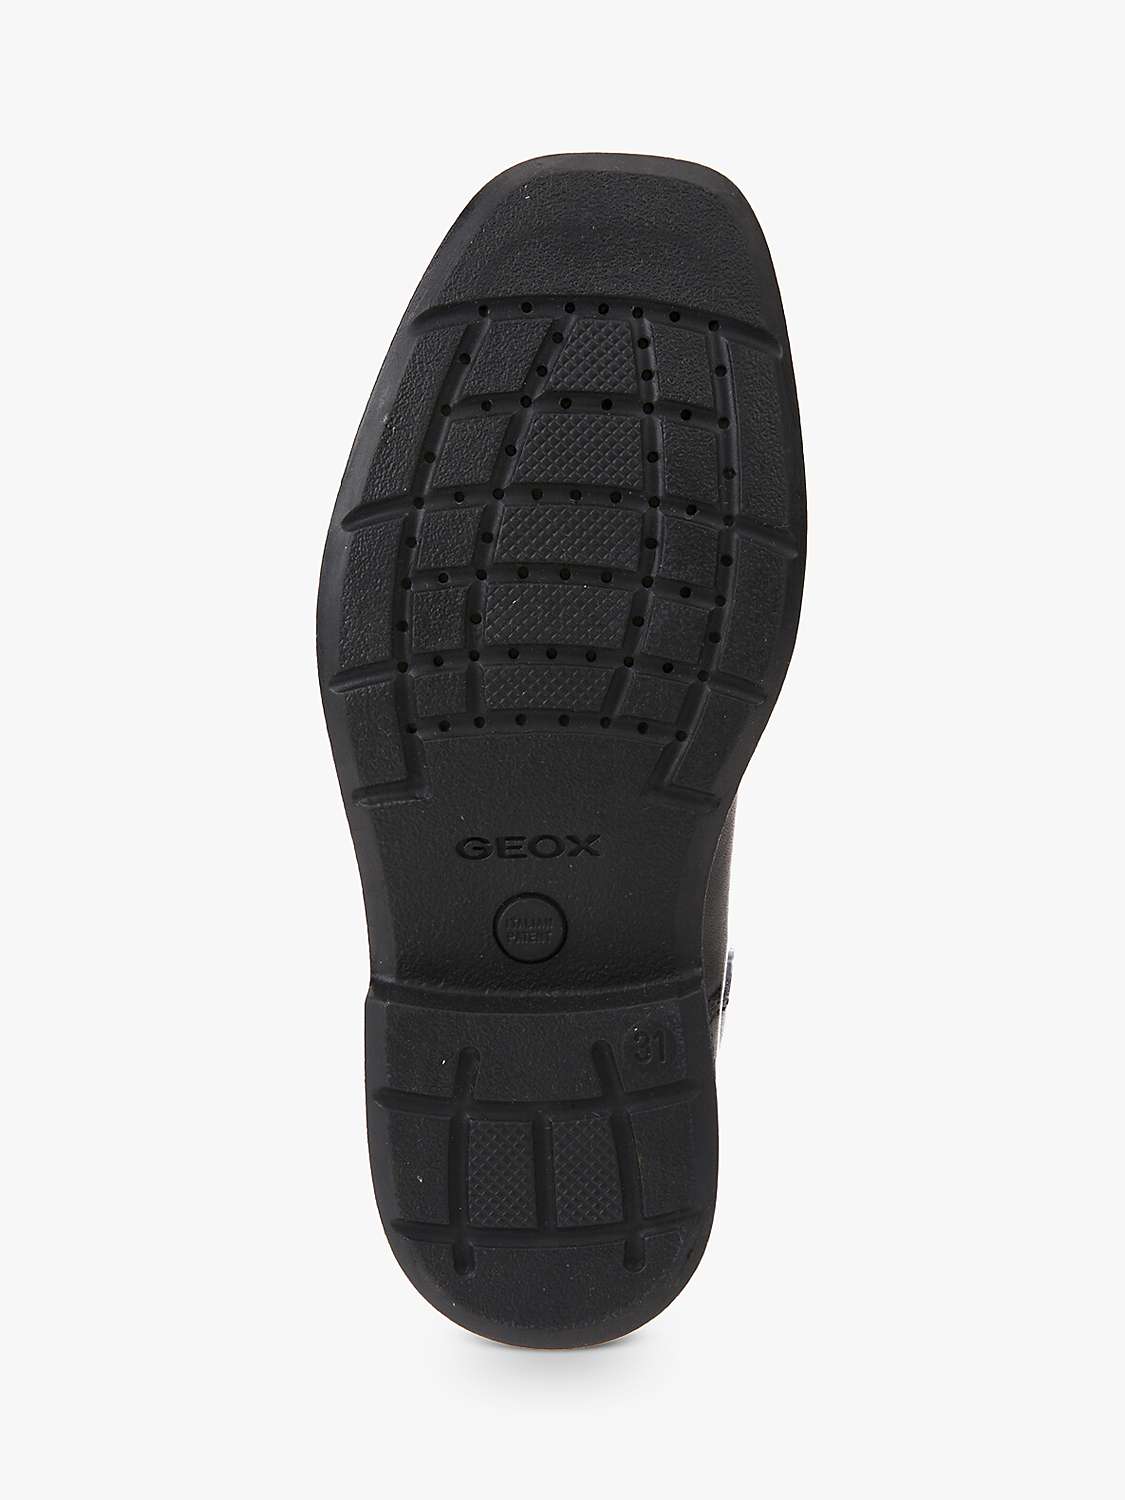 Buy Geox Kids' J Federico Lace Shoes, Black Online at johnlewis.com